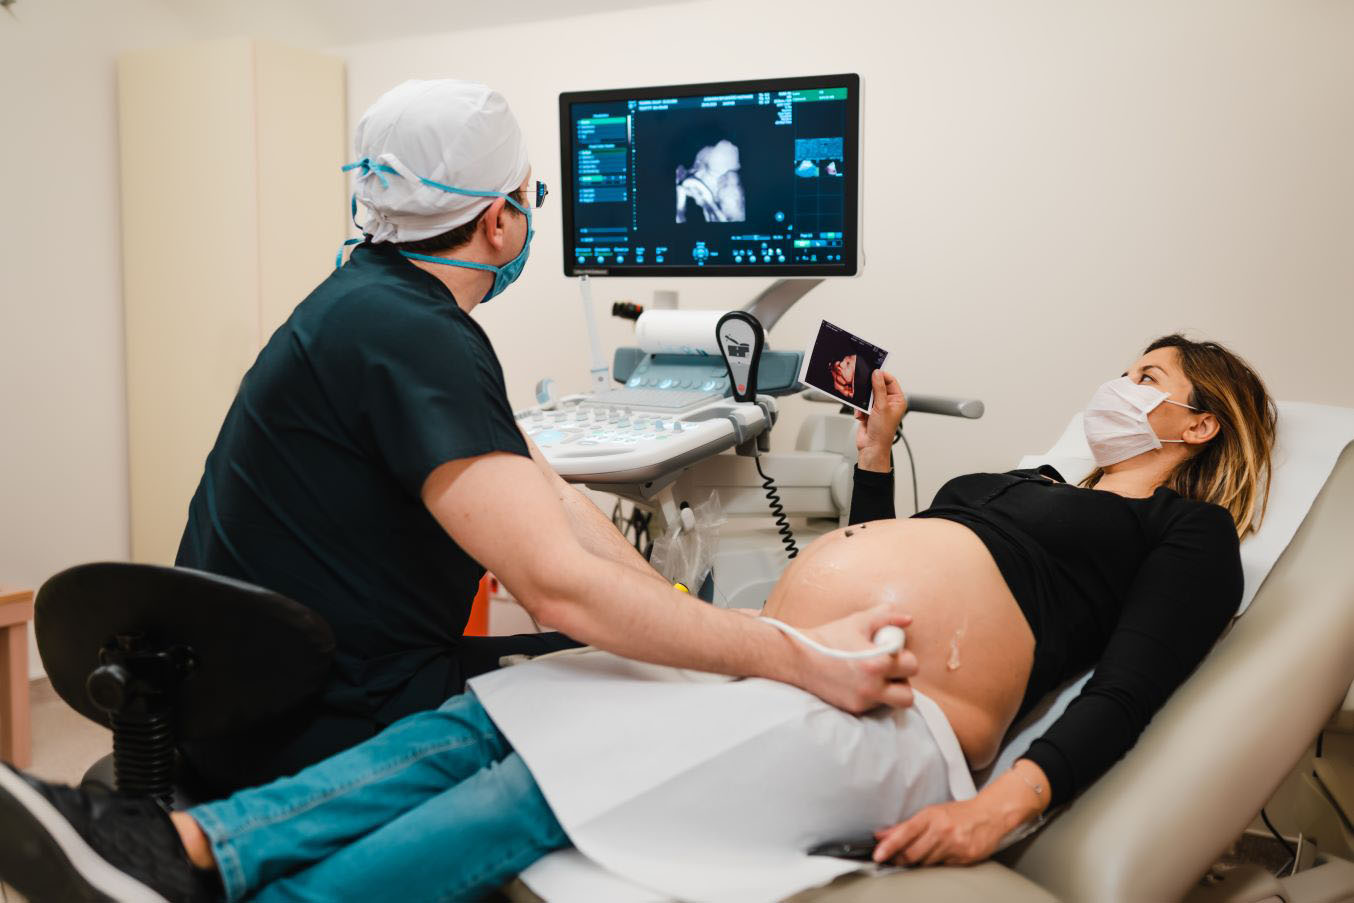 Pregnant woman getting an ultrasound